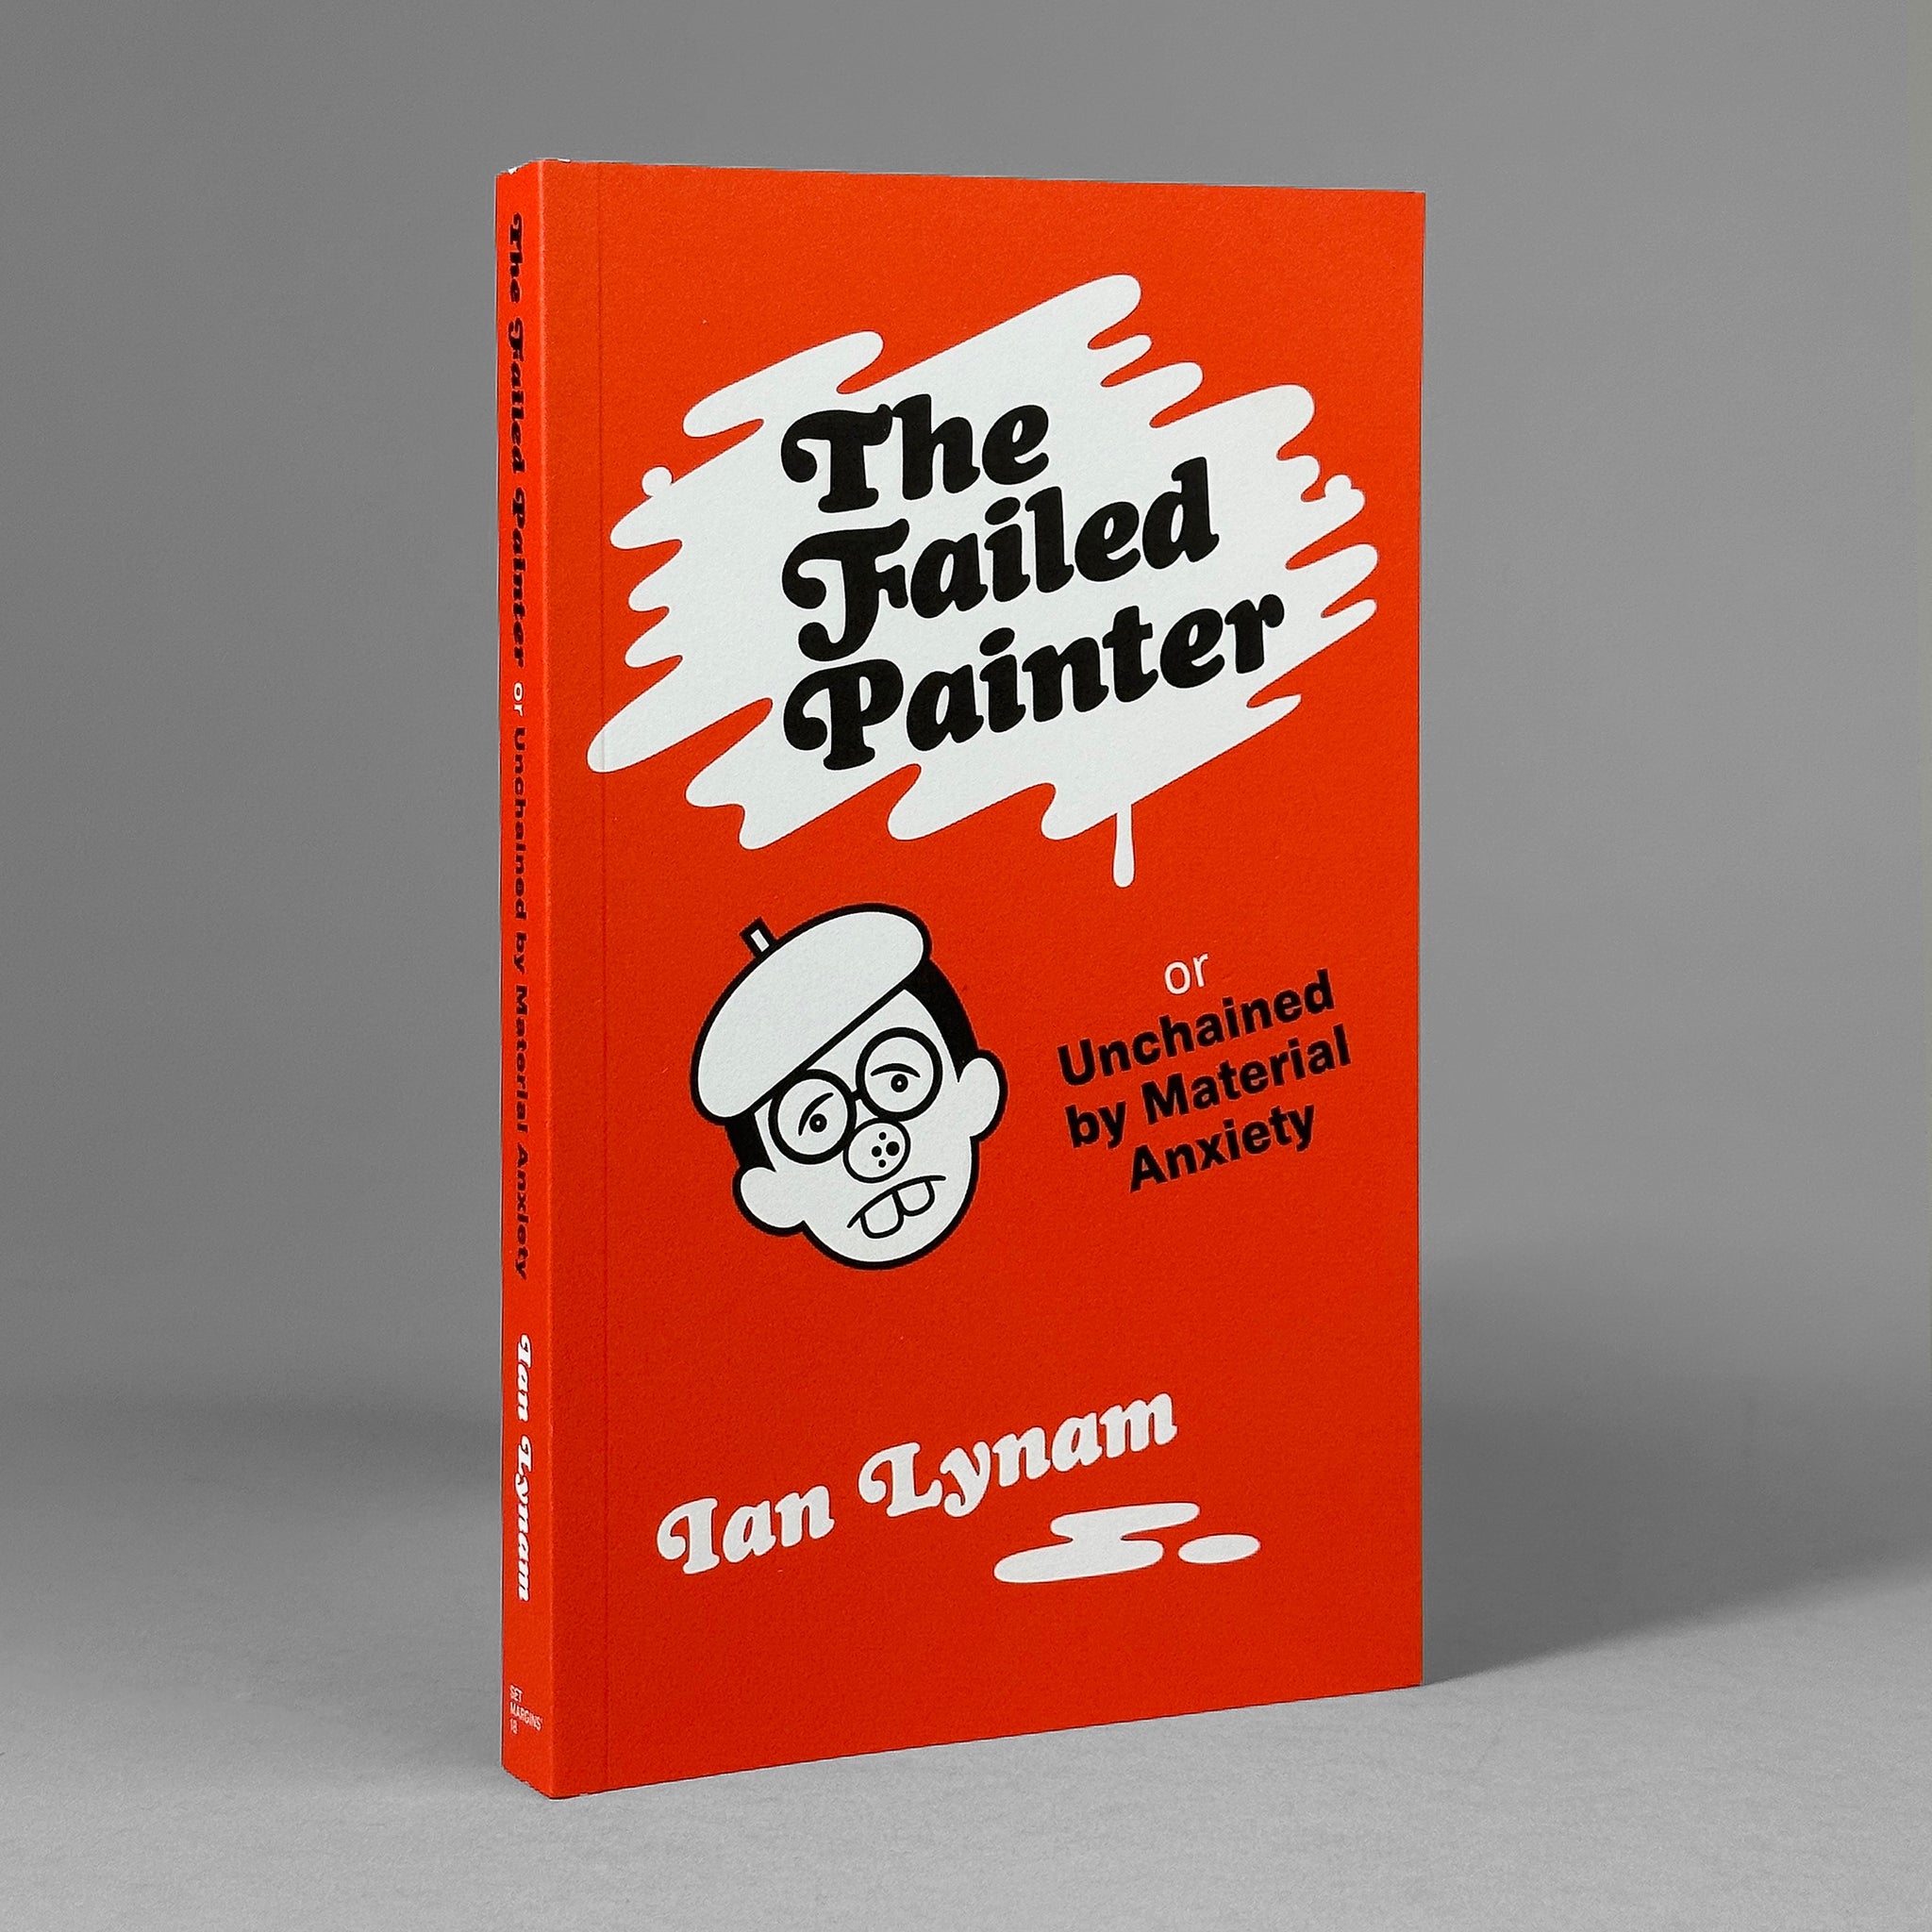 The Failed Painter or: Unchainted by Material Anxiety